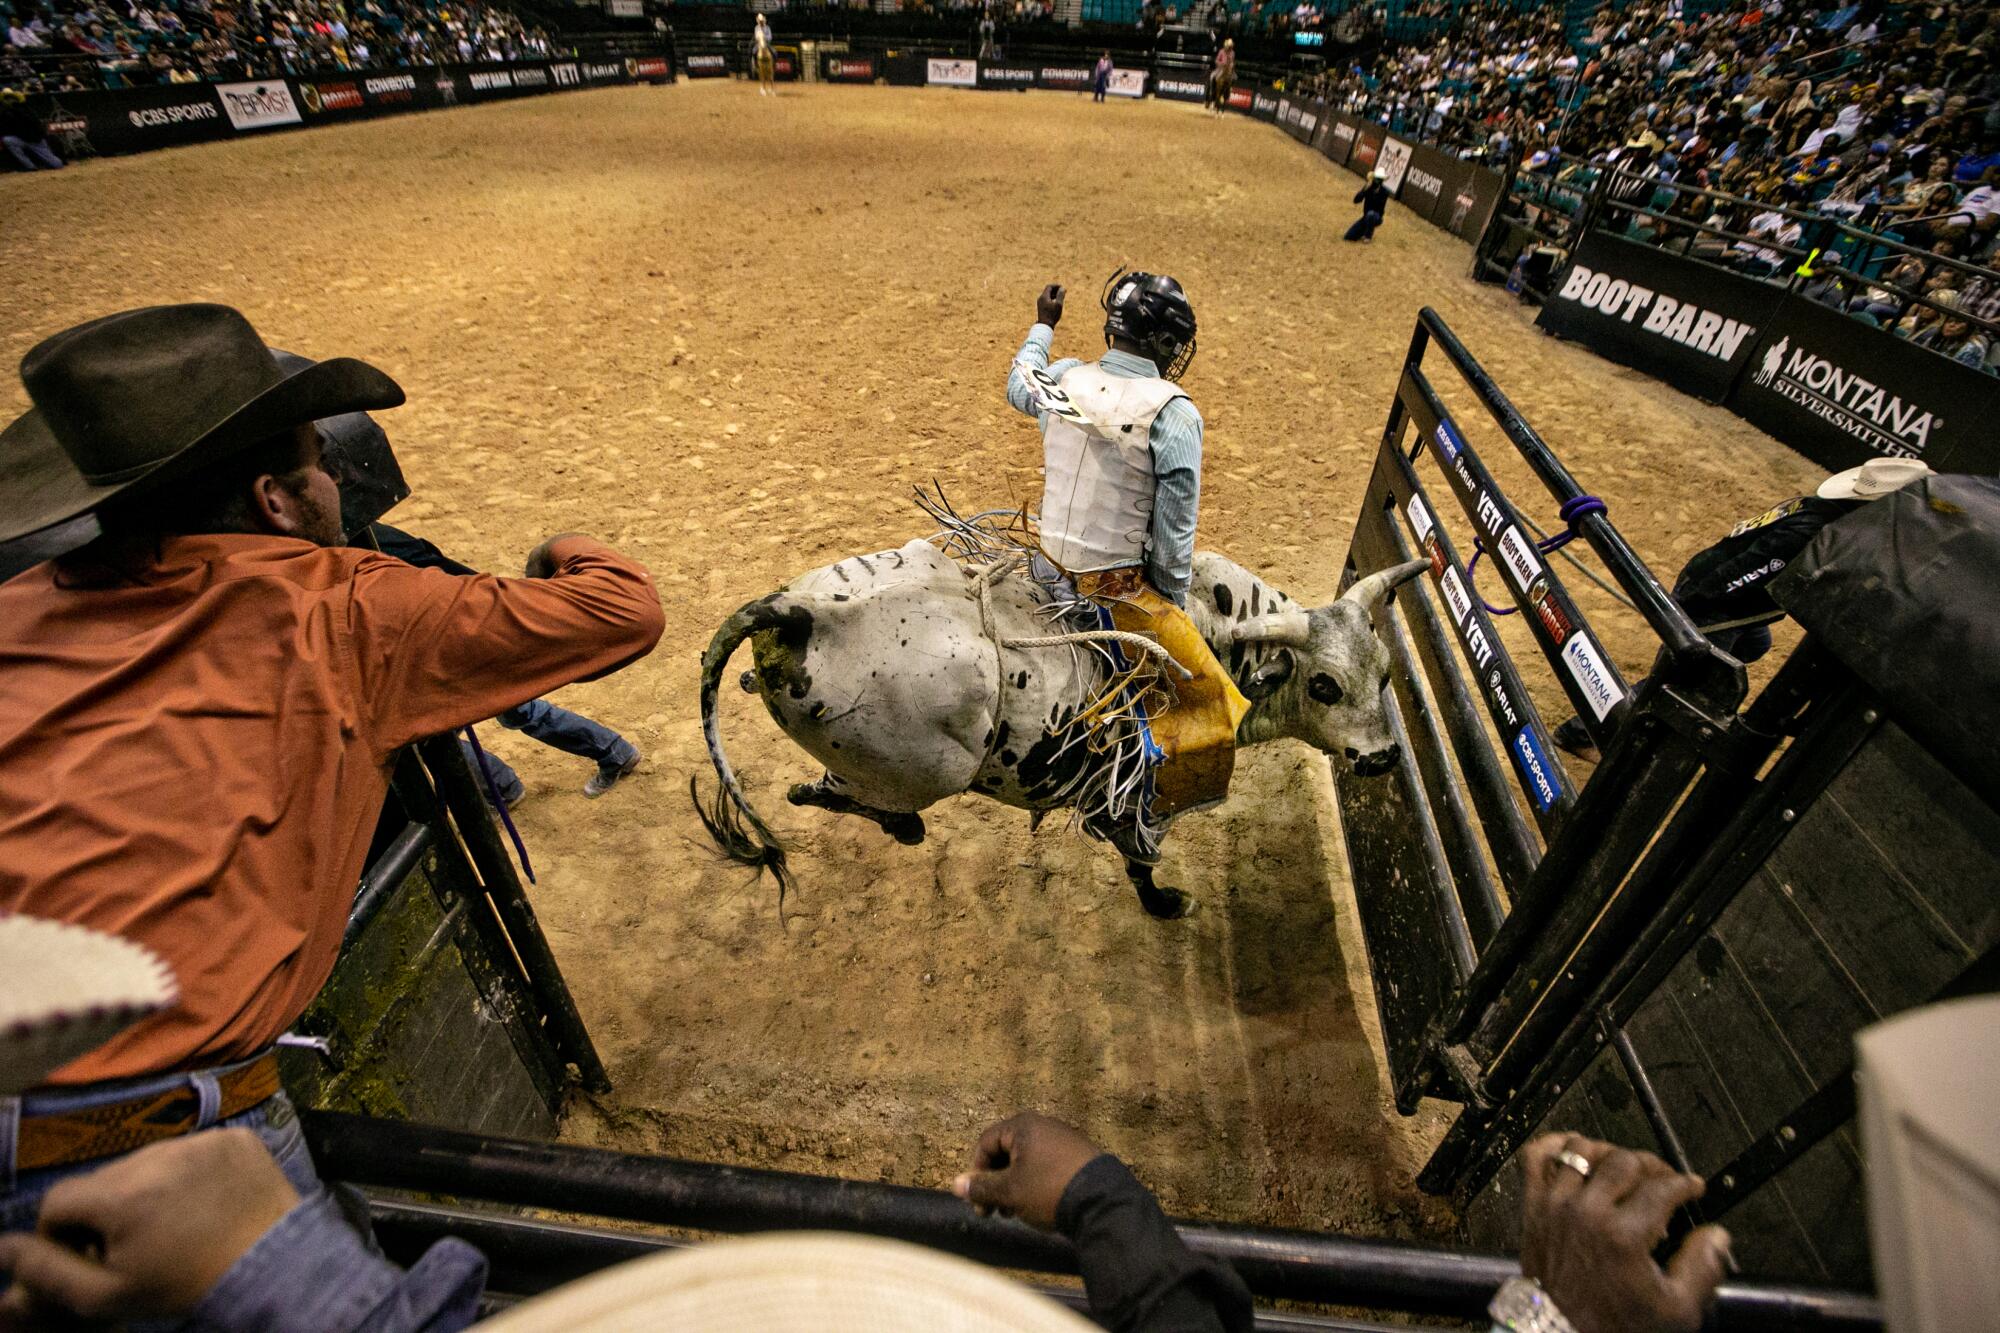 A bull and rider exit the bucking chute at the Bill Pickett Invitational Rodeo.